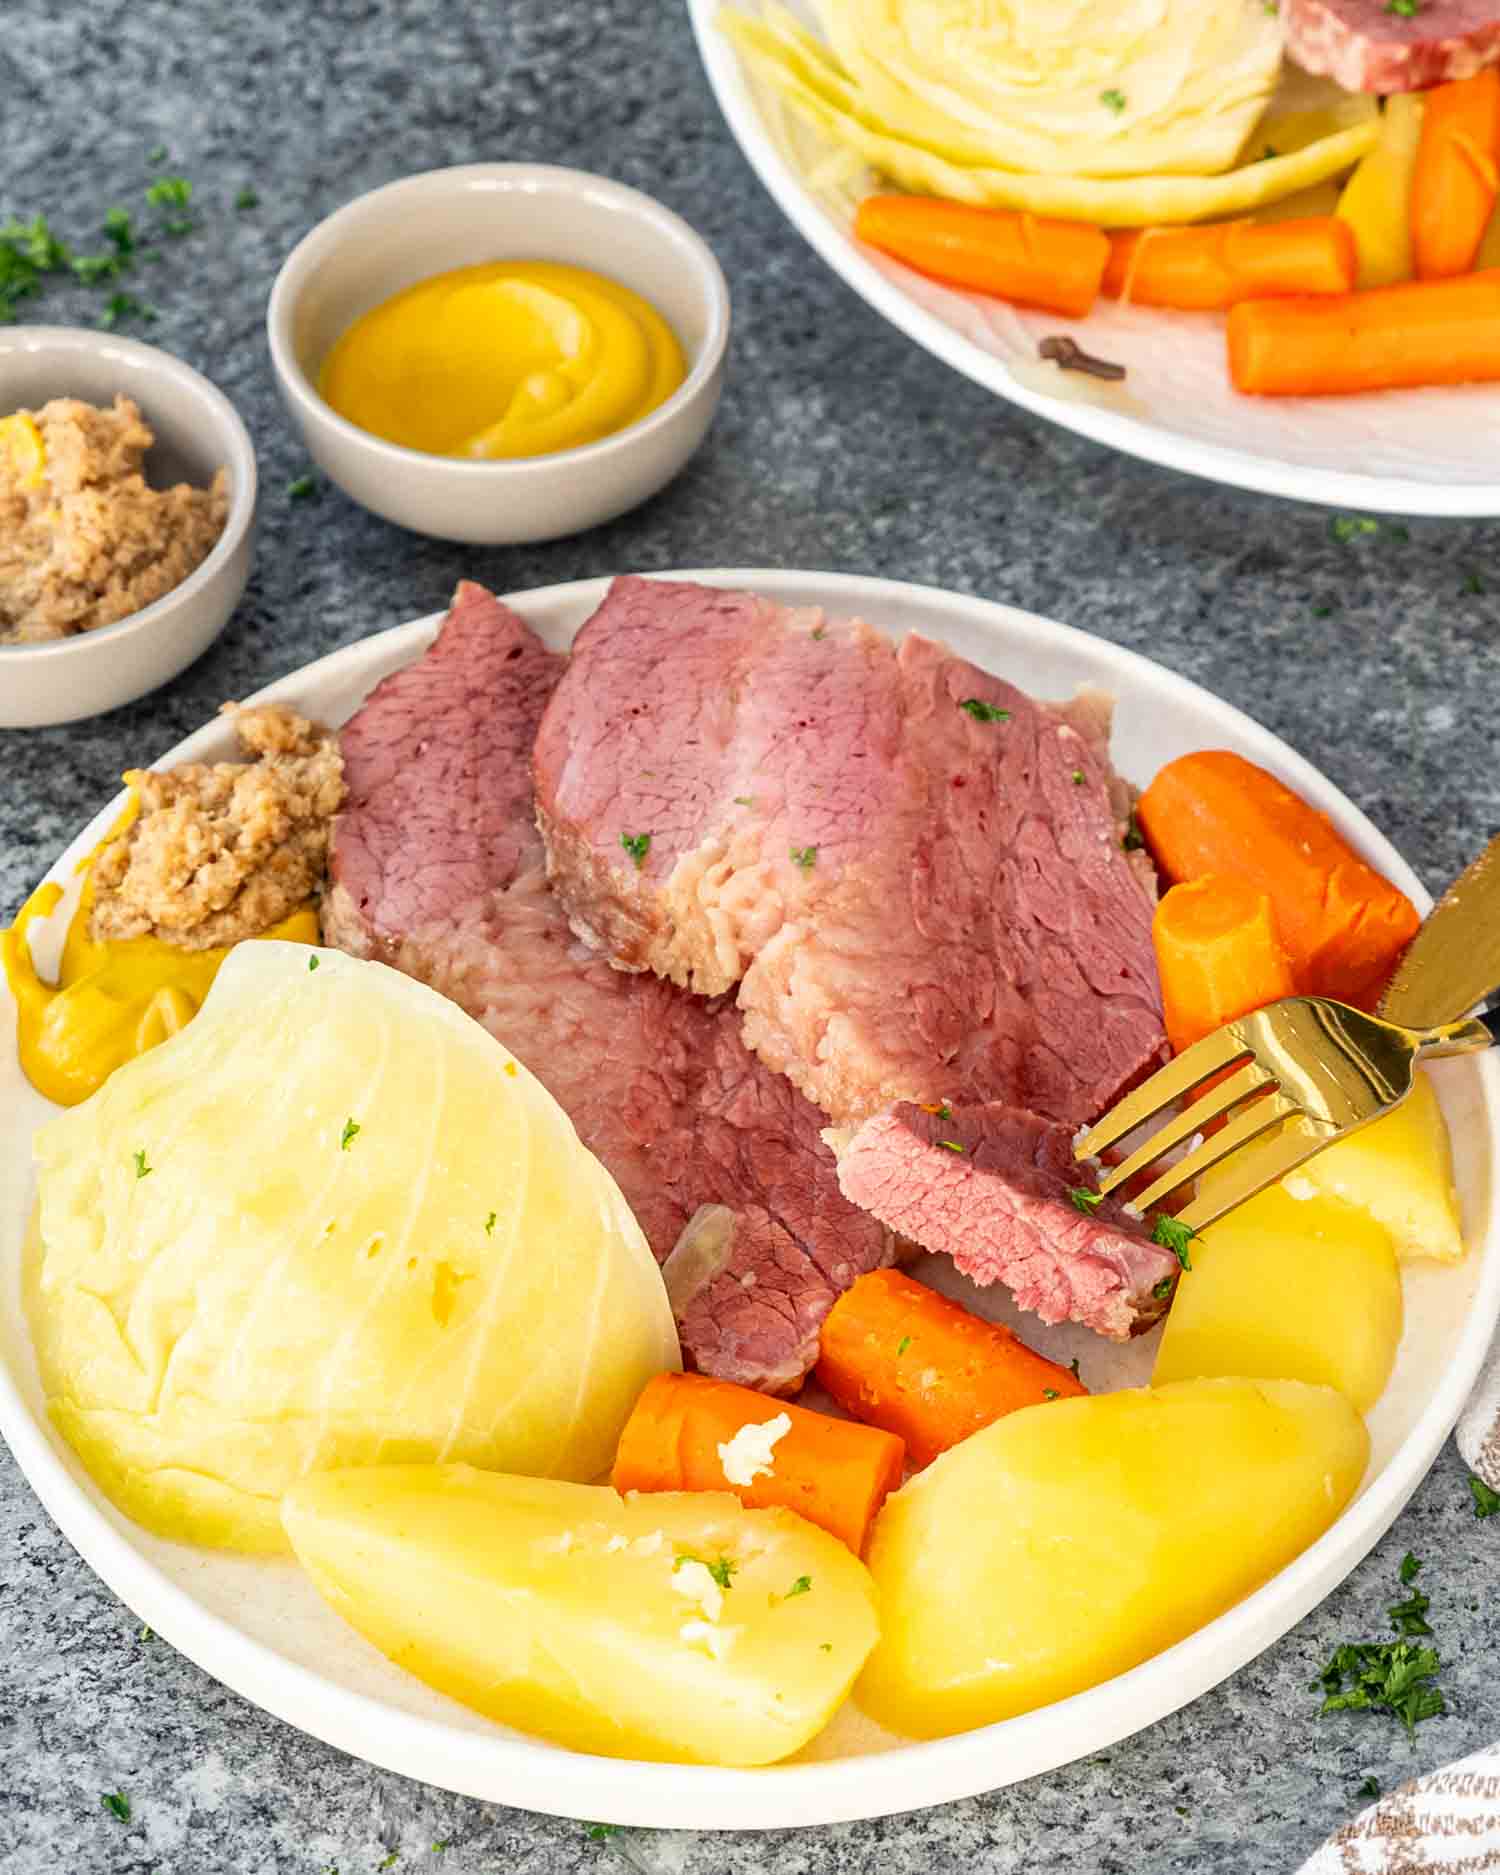 a serving of corned beef and cabbage on a white plate.